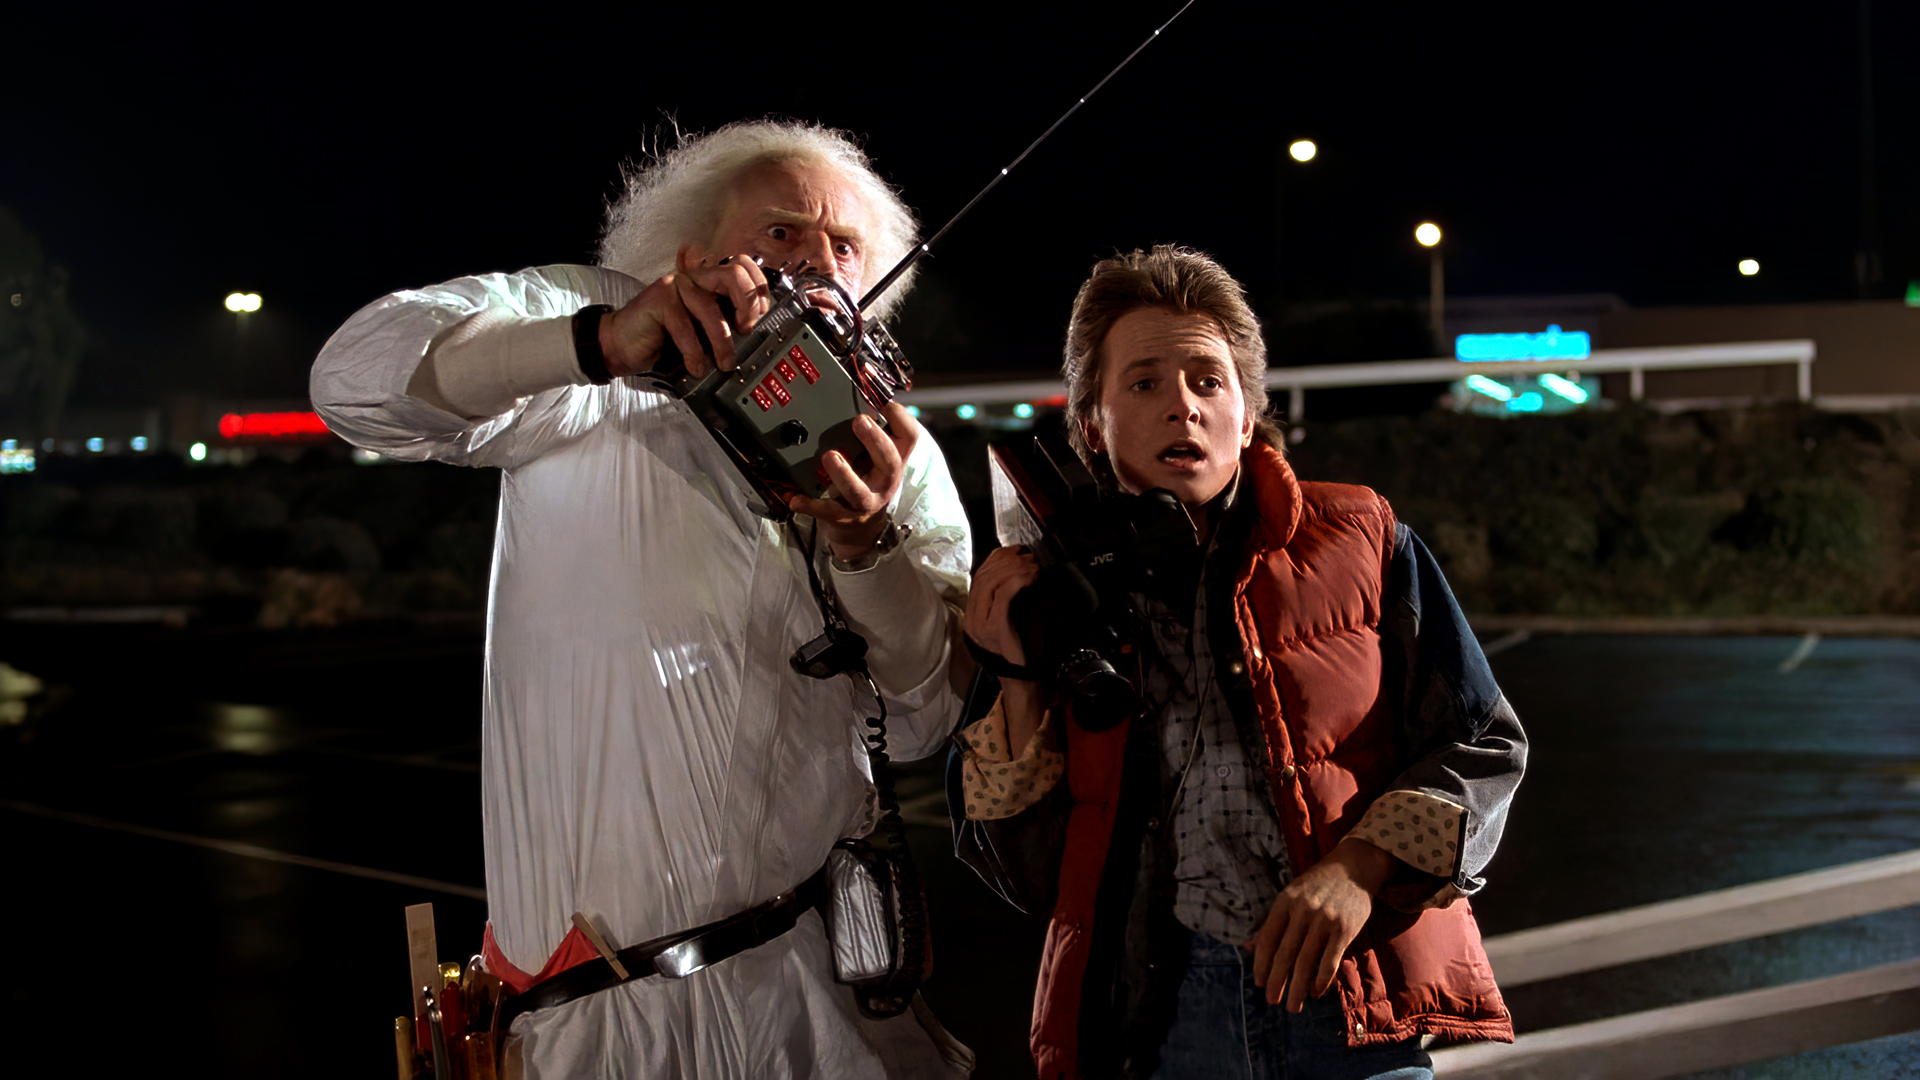 Back To The Future Movies Film Stills Dr Emmett Brown Marty McFly Robert Zemeckis Christopher Lloyd  1920x1080